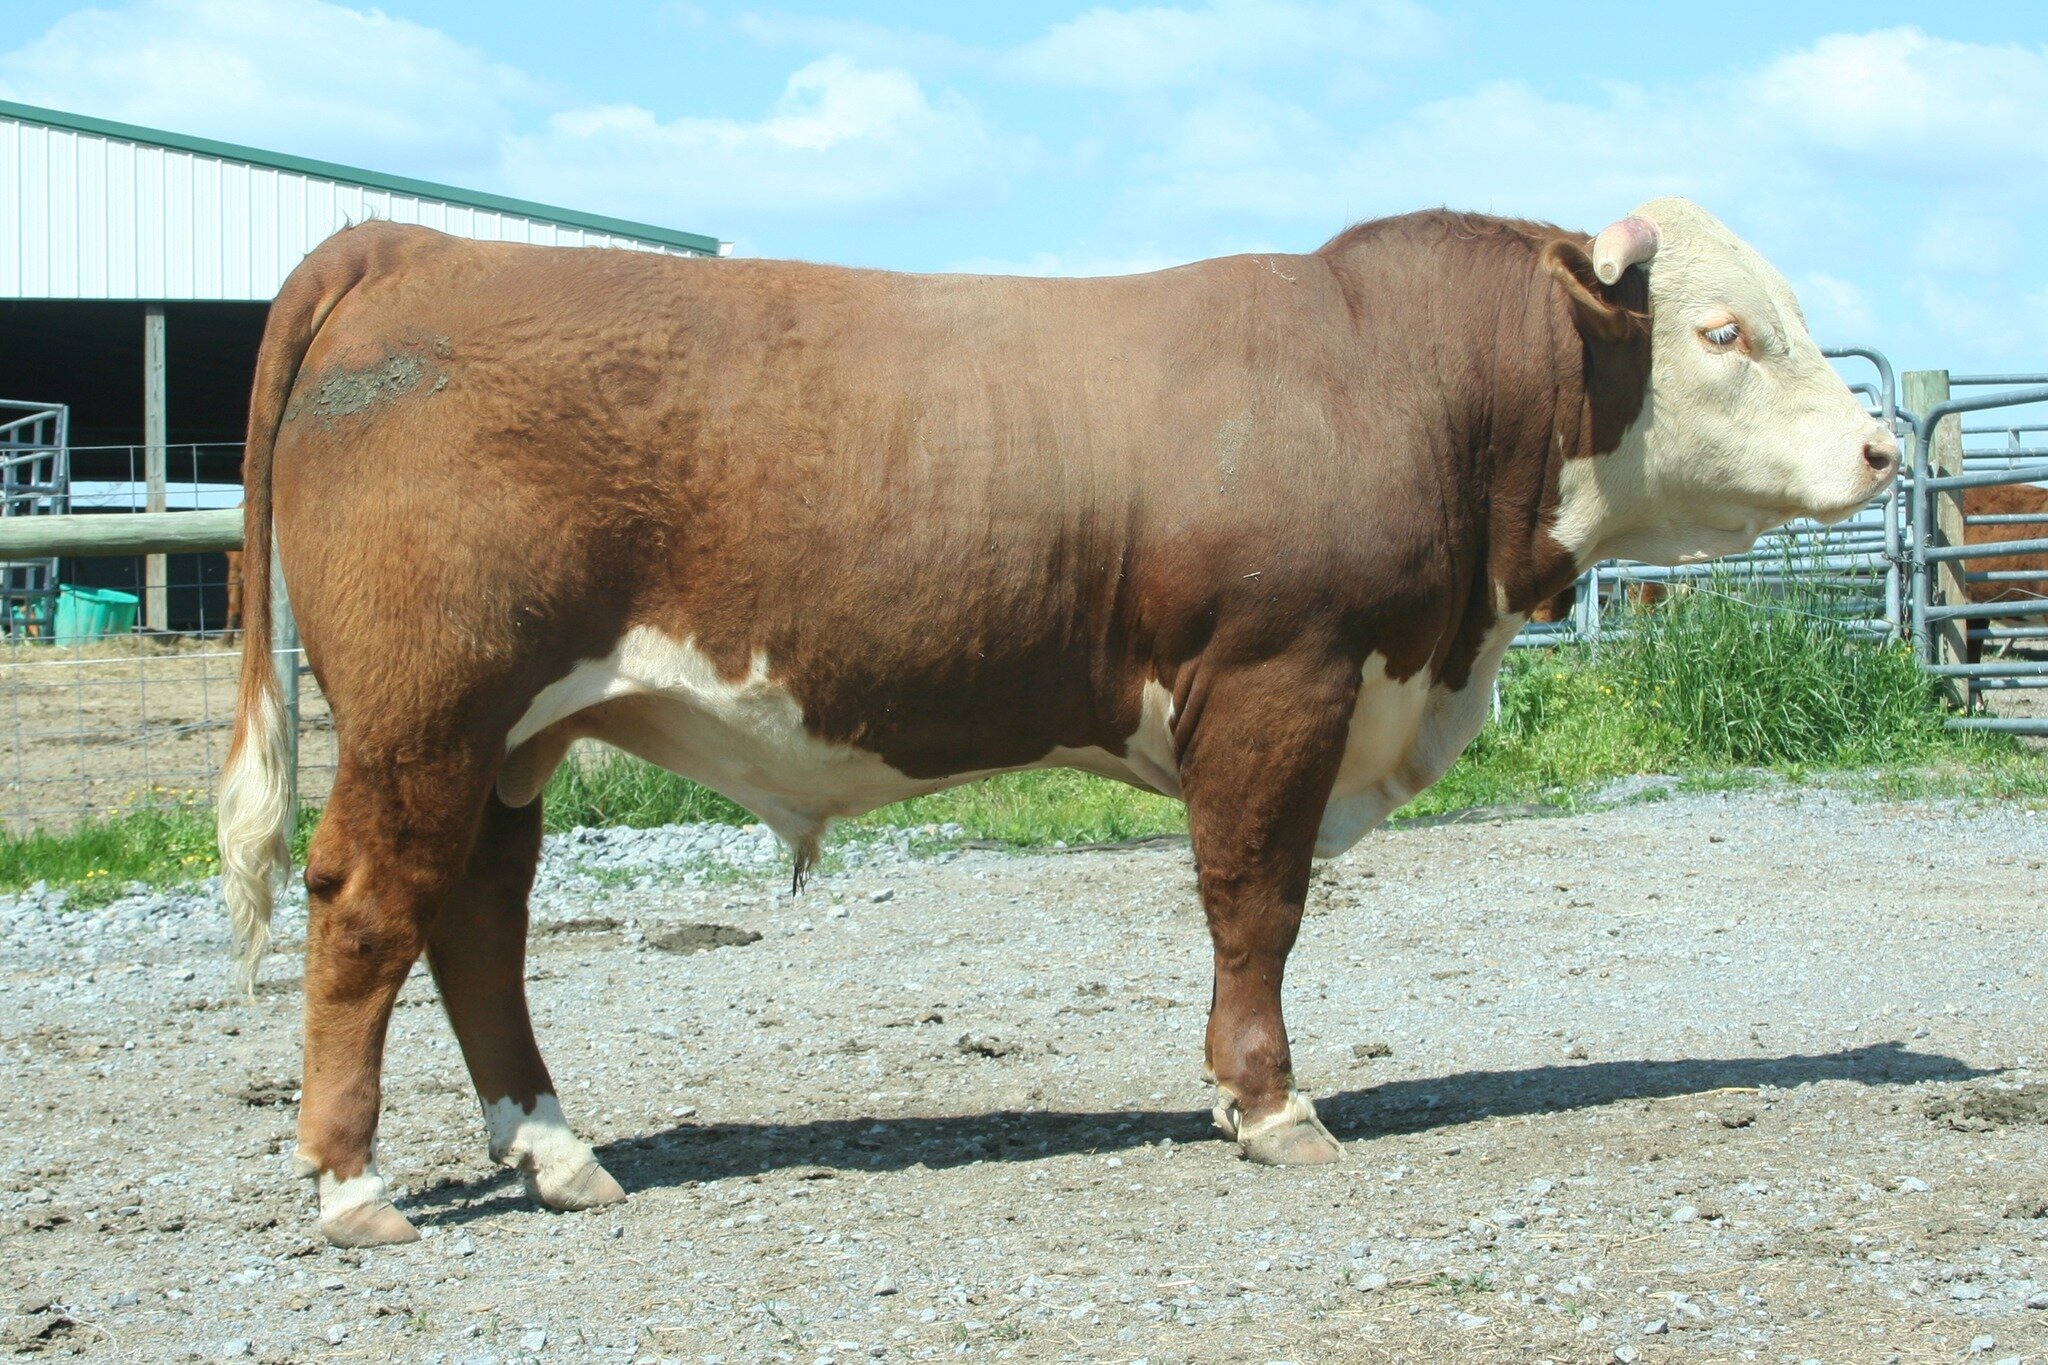 JC L1 DOMINO 942G 2108

Here is a good herd sire prospect that's in the top 15% on calving ease and birth weight. Top 18% on carcass traits and great on maternal. PLUS he looks the part. 
Semen tested, BVD PI tested with genomic EPDs for maximum TAEP